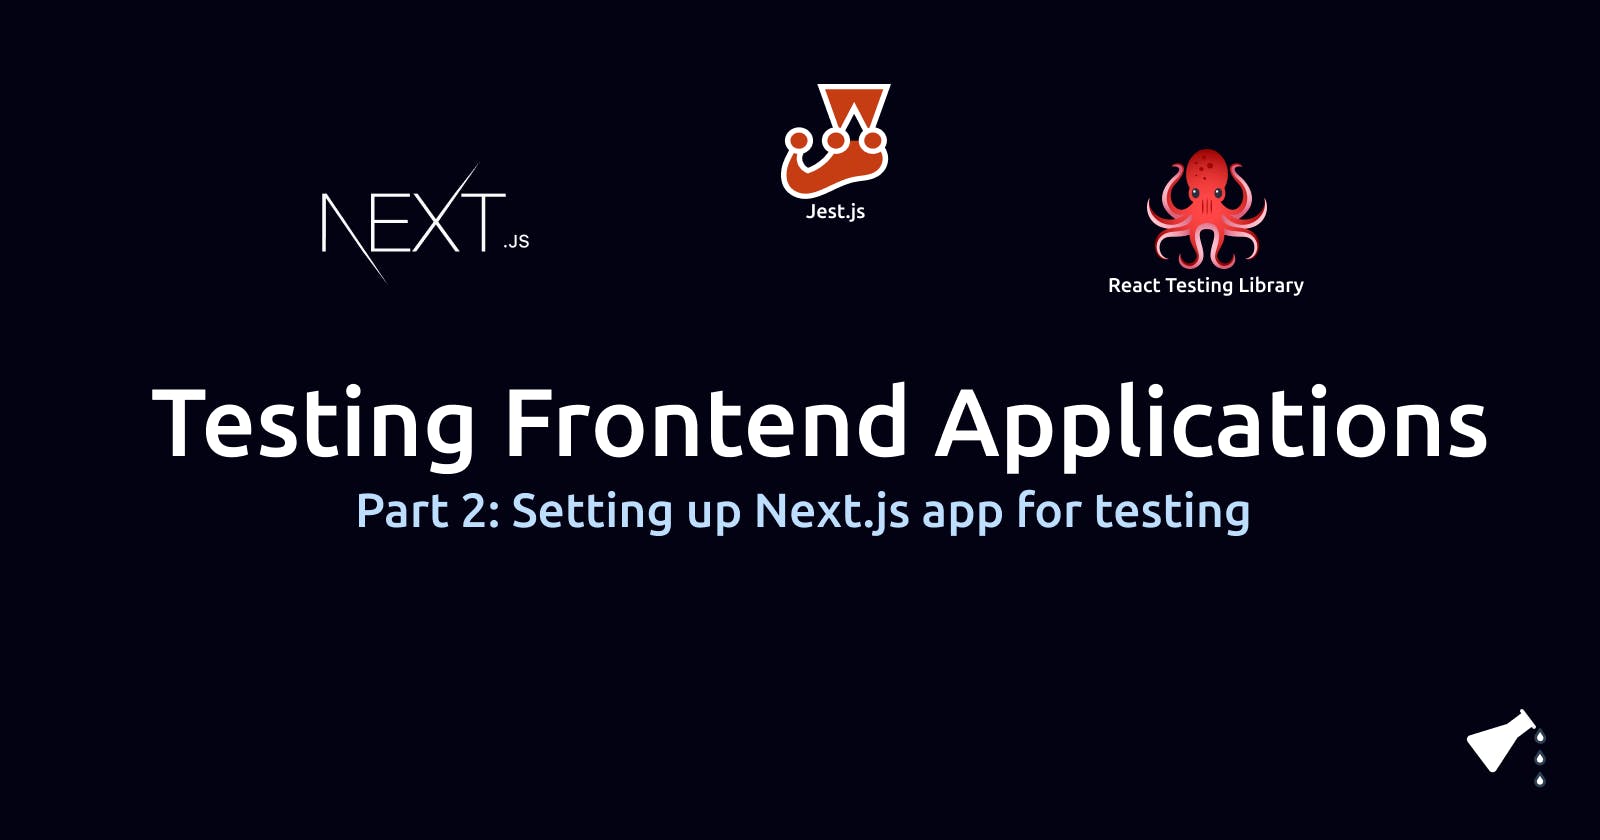 Testing Frontend Applications: Setting up Next.js project for testing (Part 2)